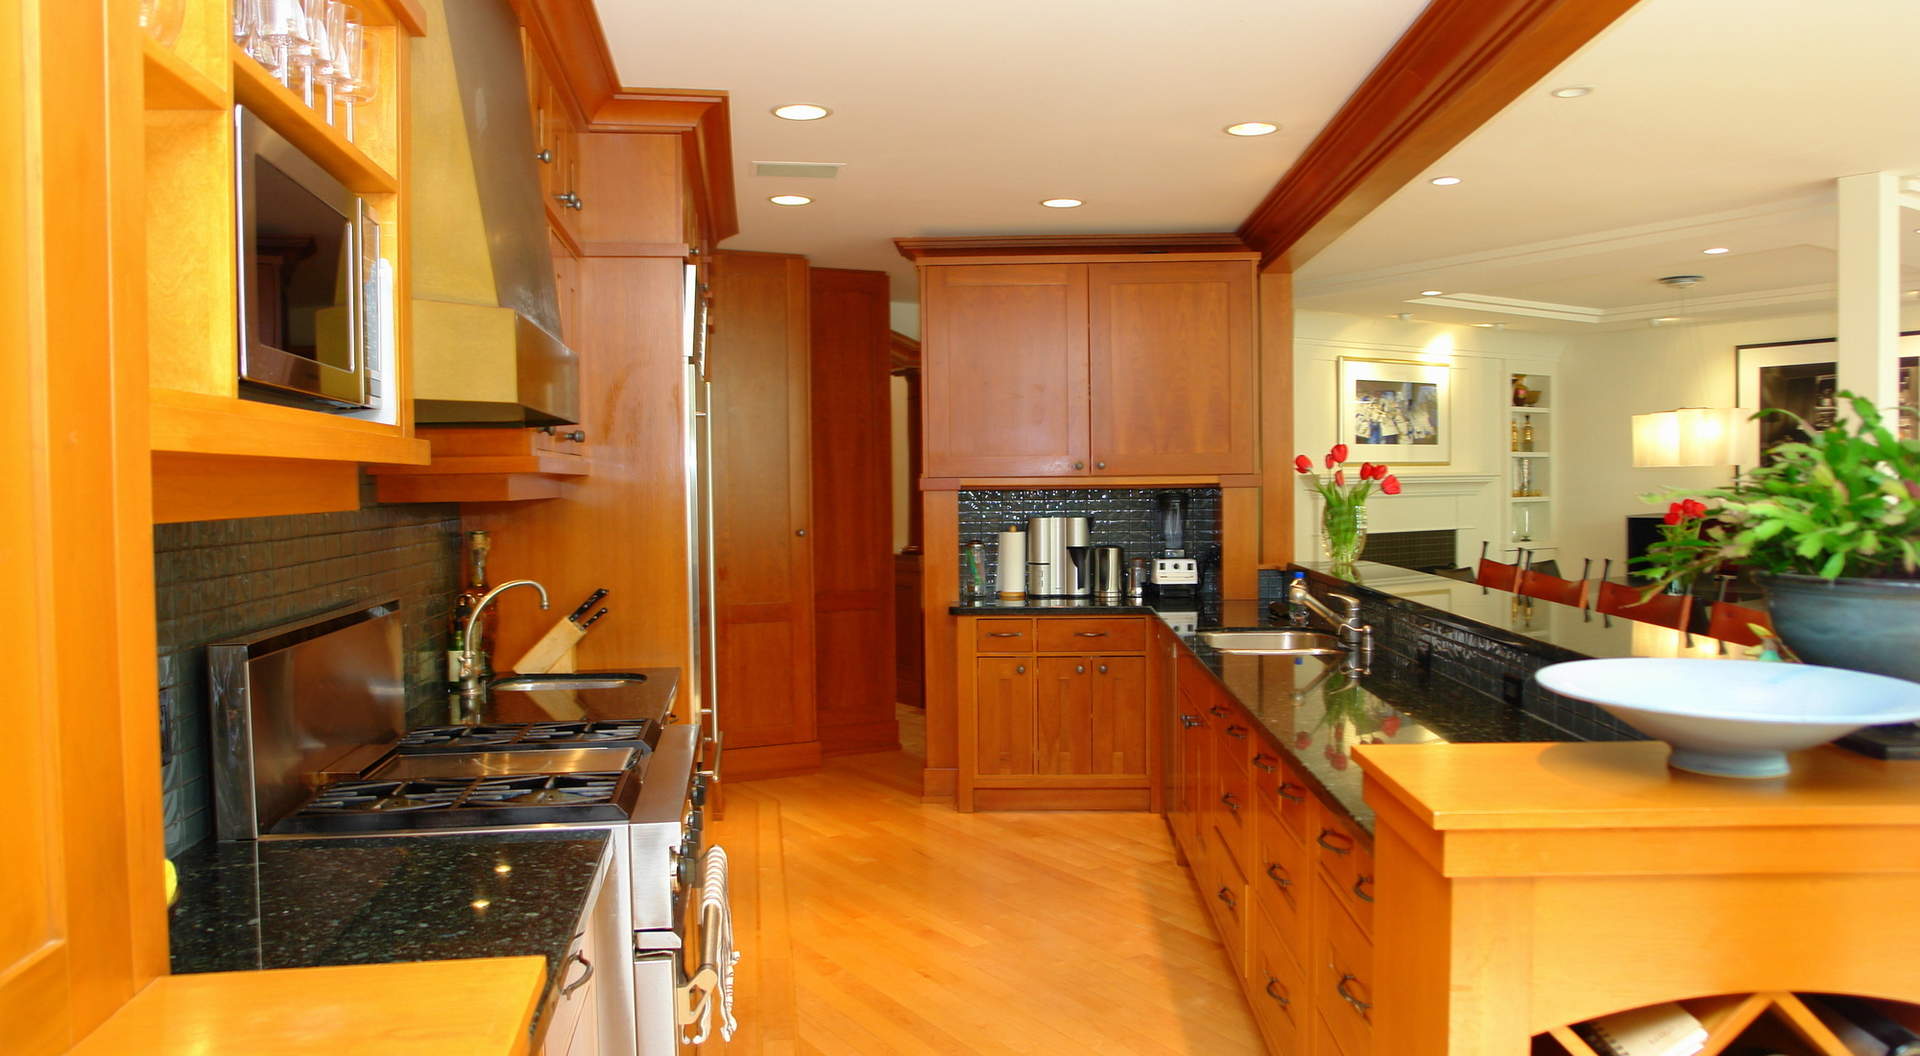 Fabulous Cabinetry